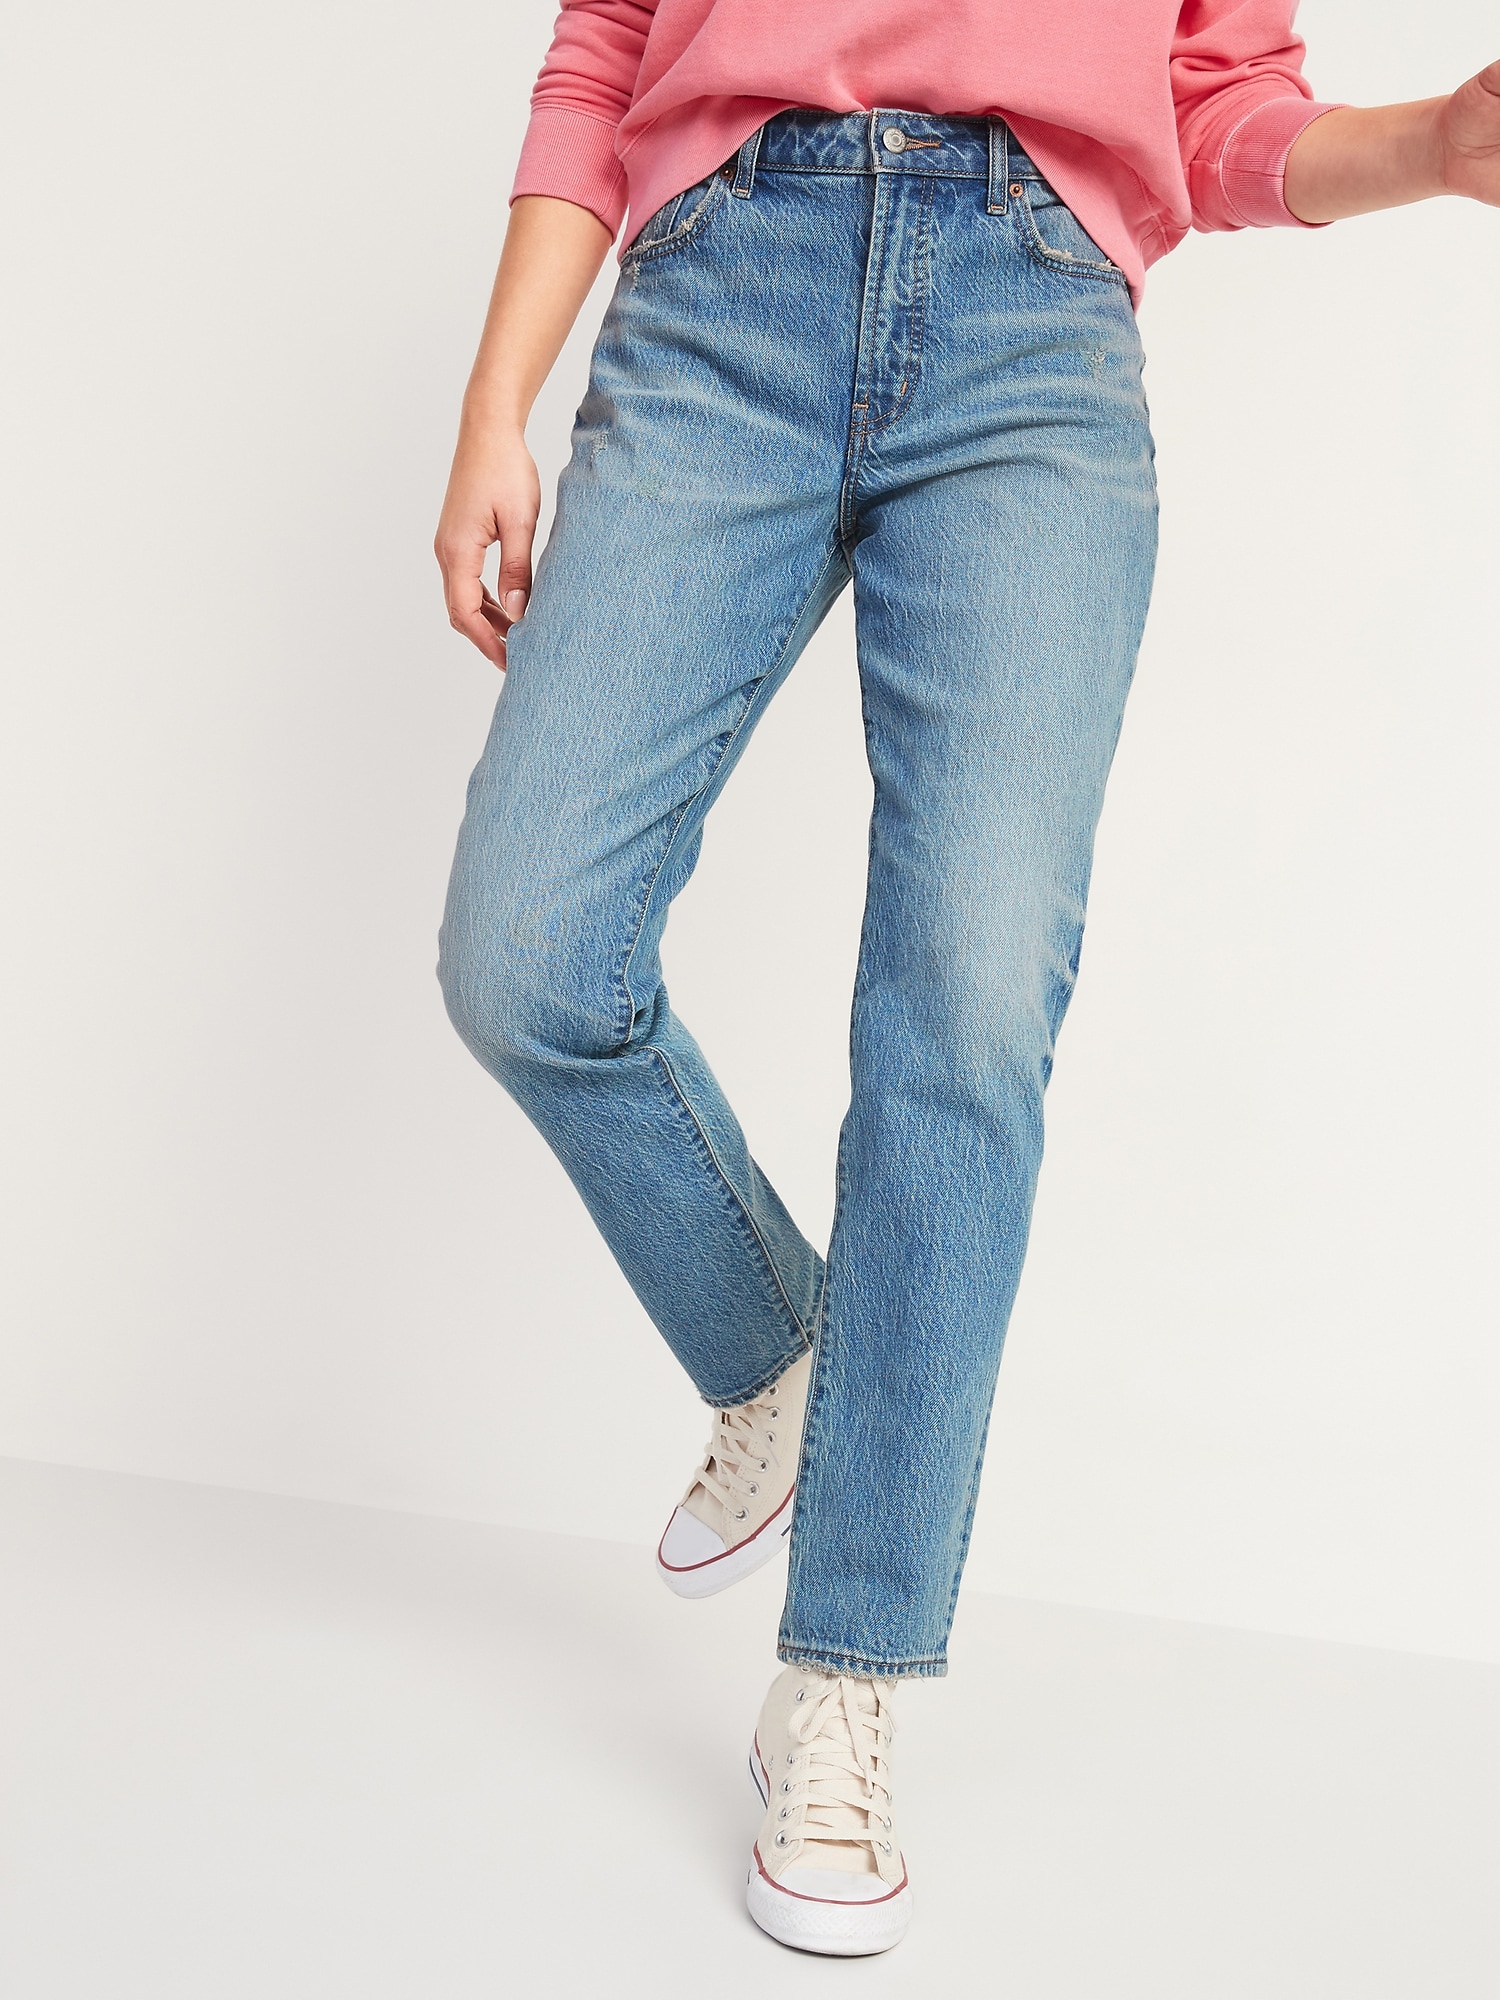 high rise light wash jeans